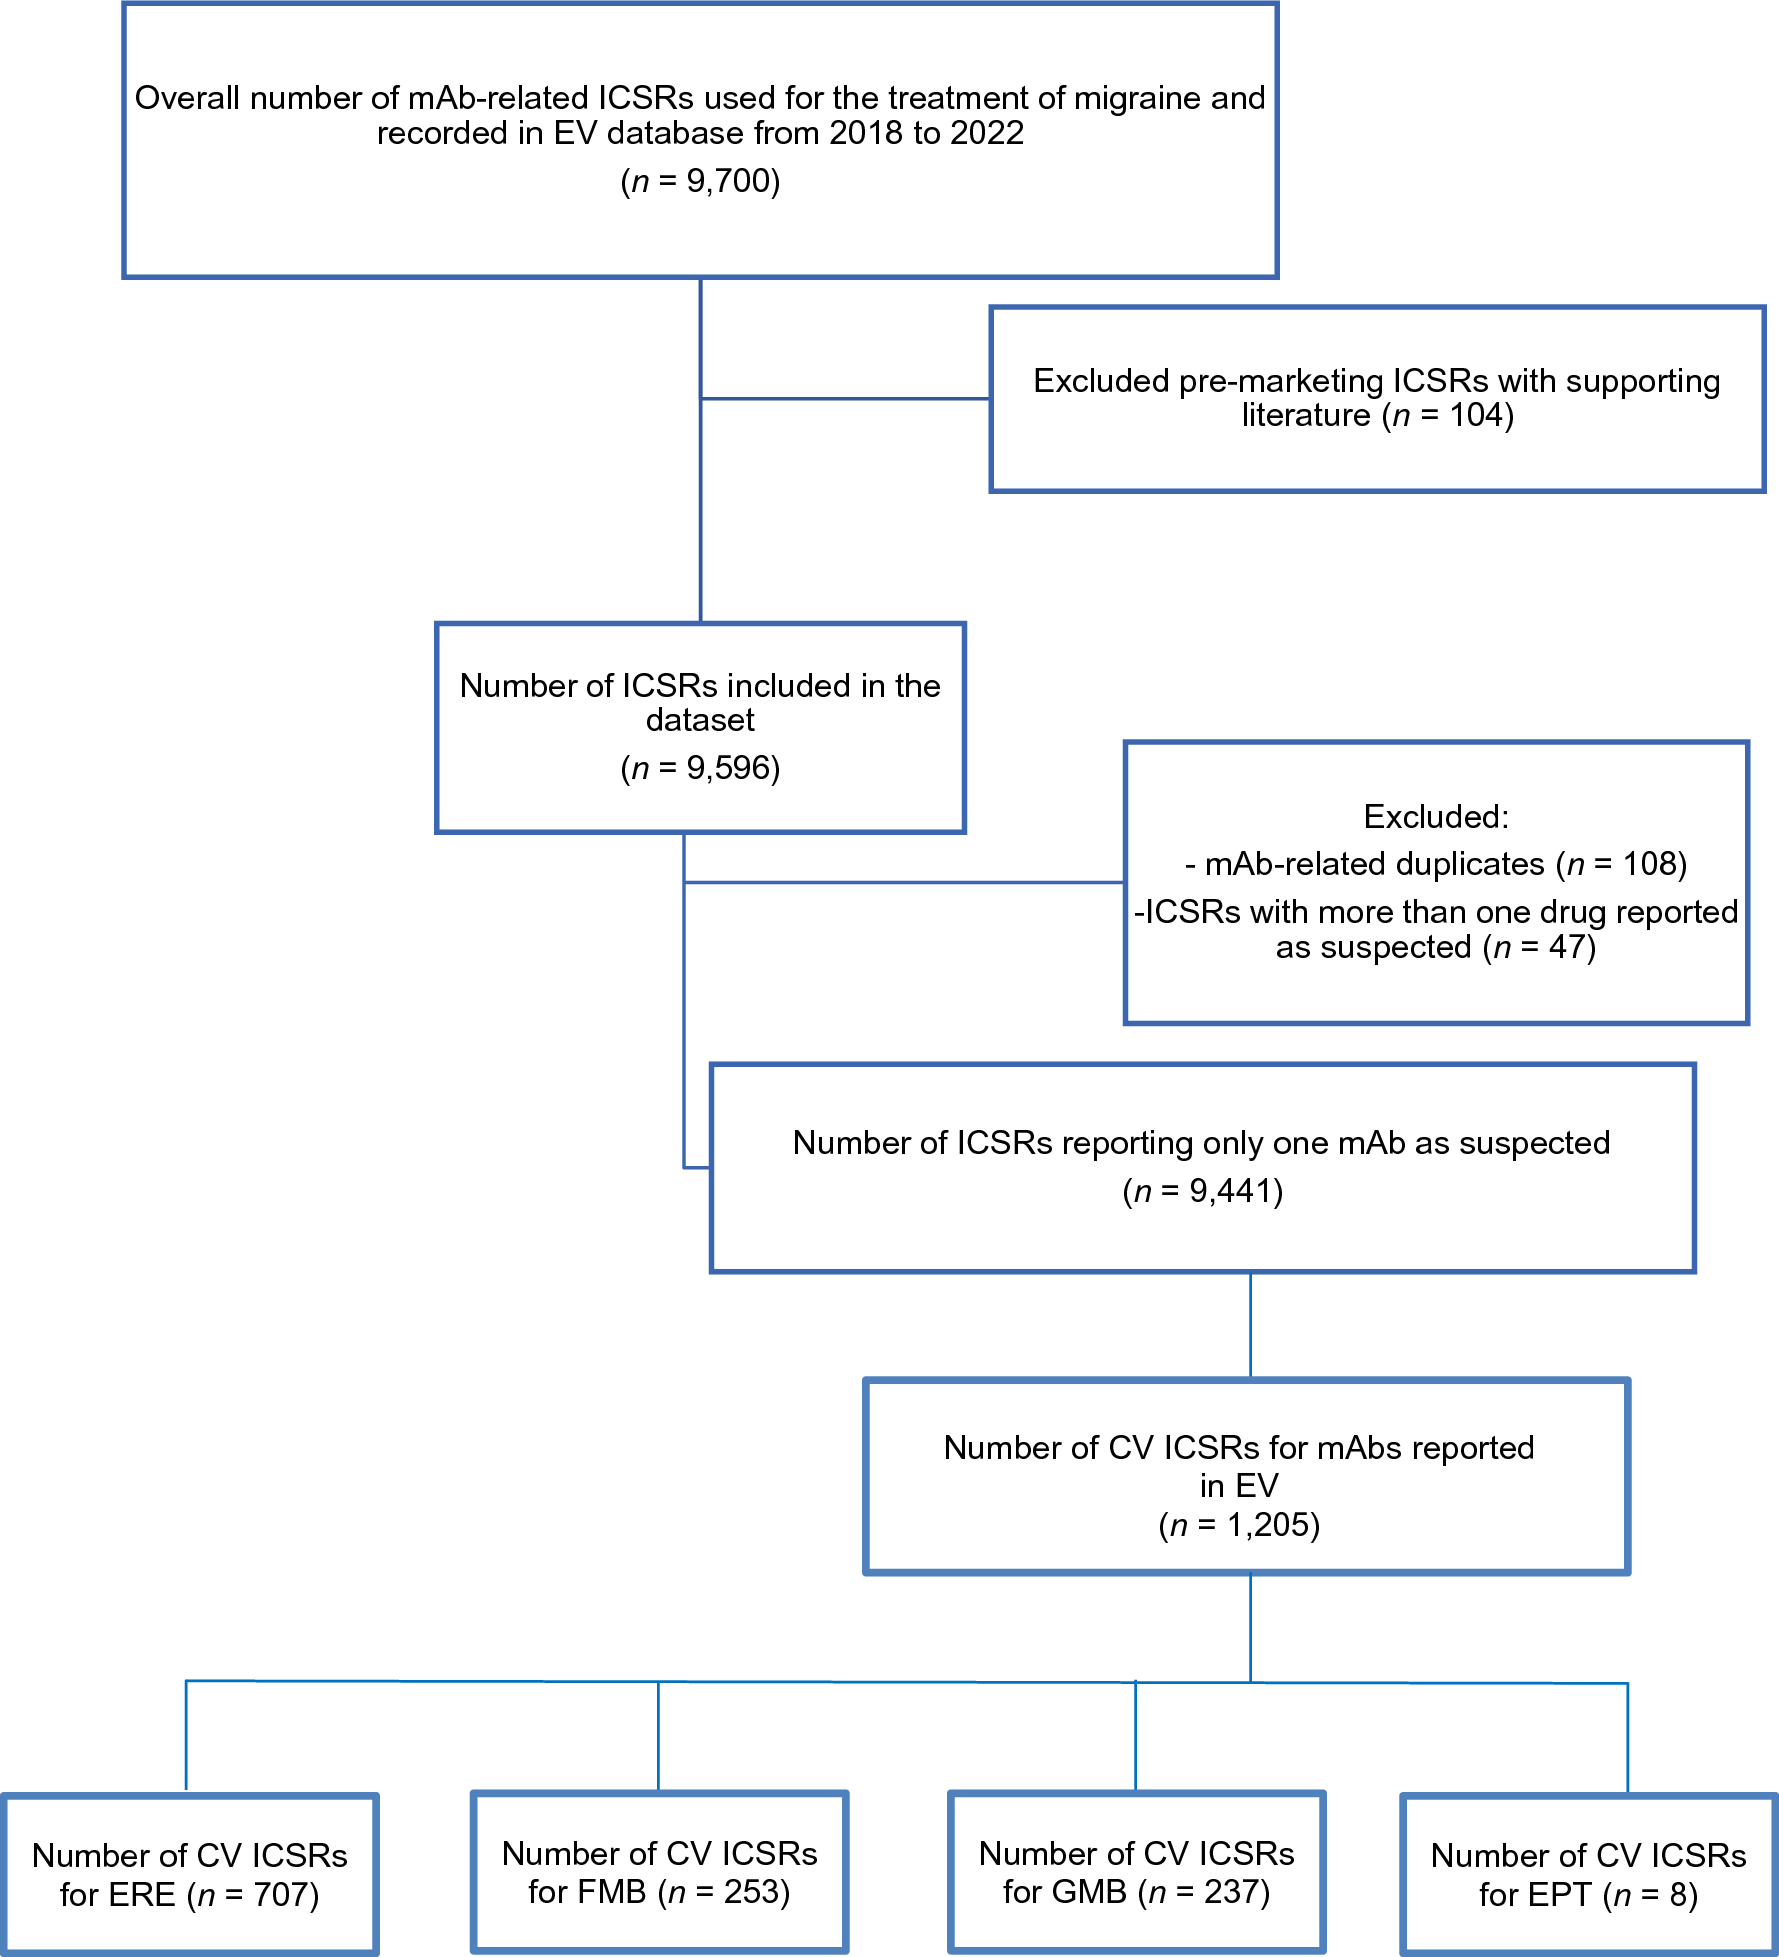 Cardiovascular Adverse Drug Reactions of Anti-Calcitonin Gene-Related Peptide Monoclonal Antibodies for Migraine Prevention: An Analysis from the European Spontaneous Adverse Event Reporting System